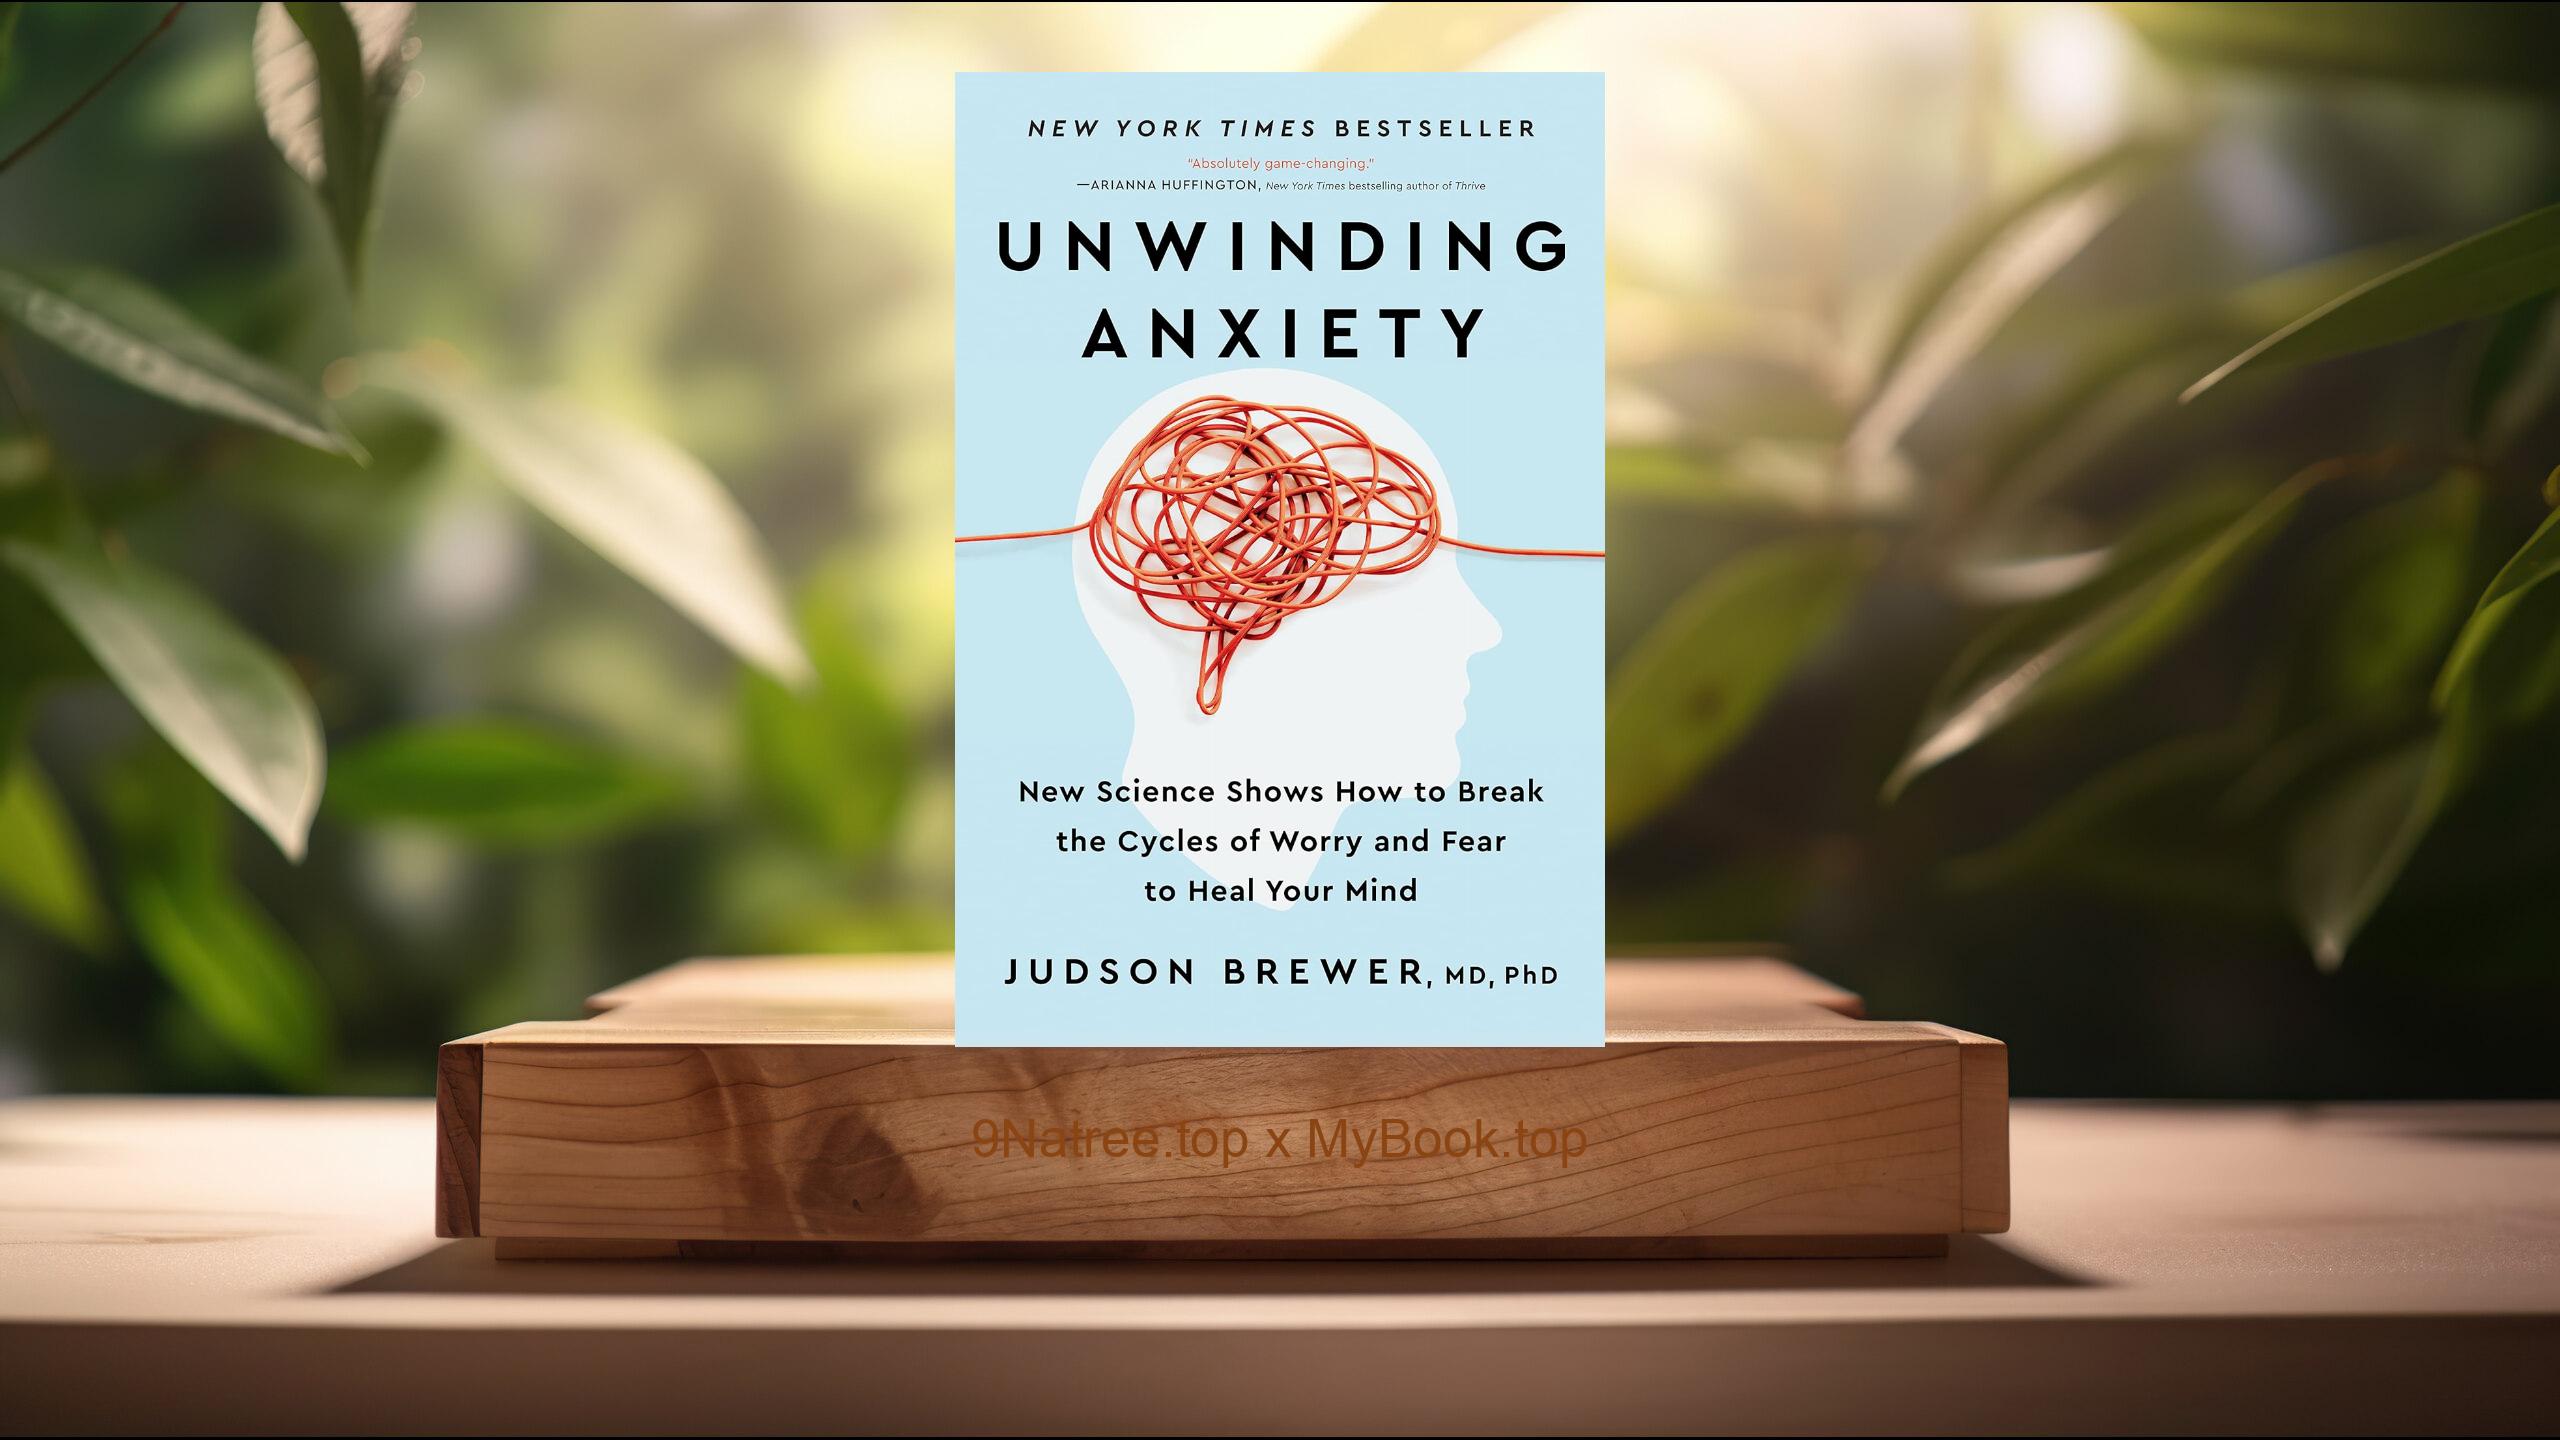 [Review] Unwinding Anxiety (Judson Brewer) Summarized